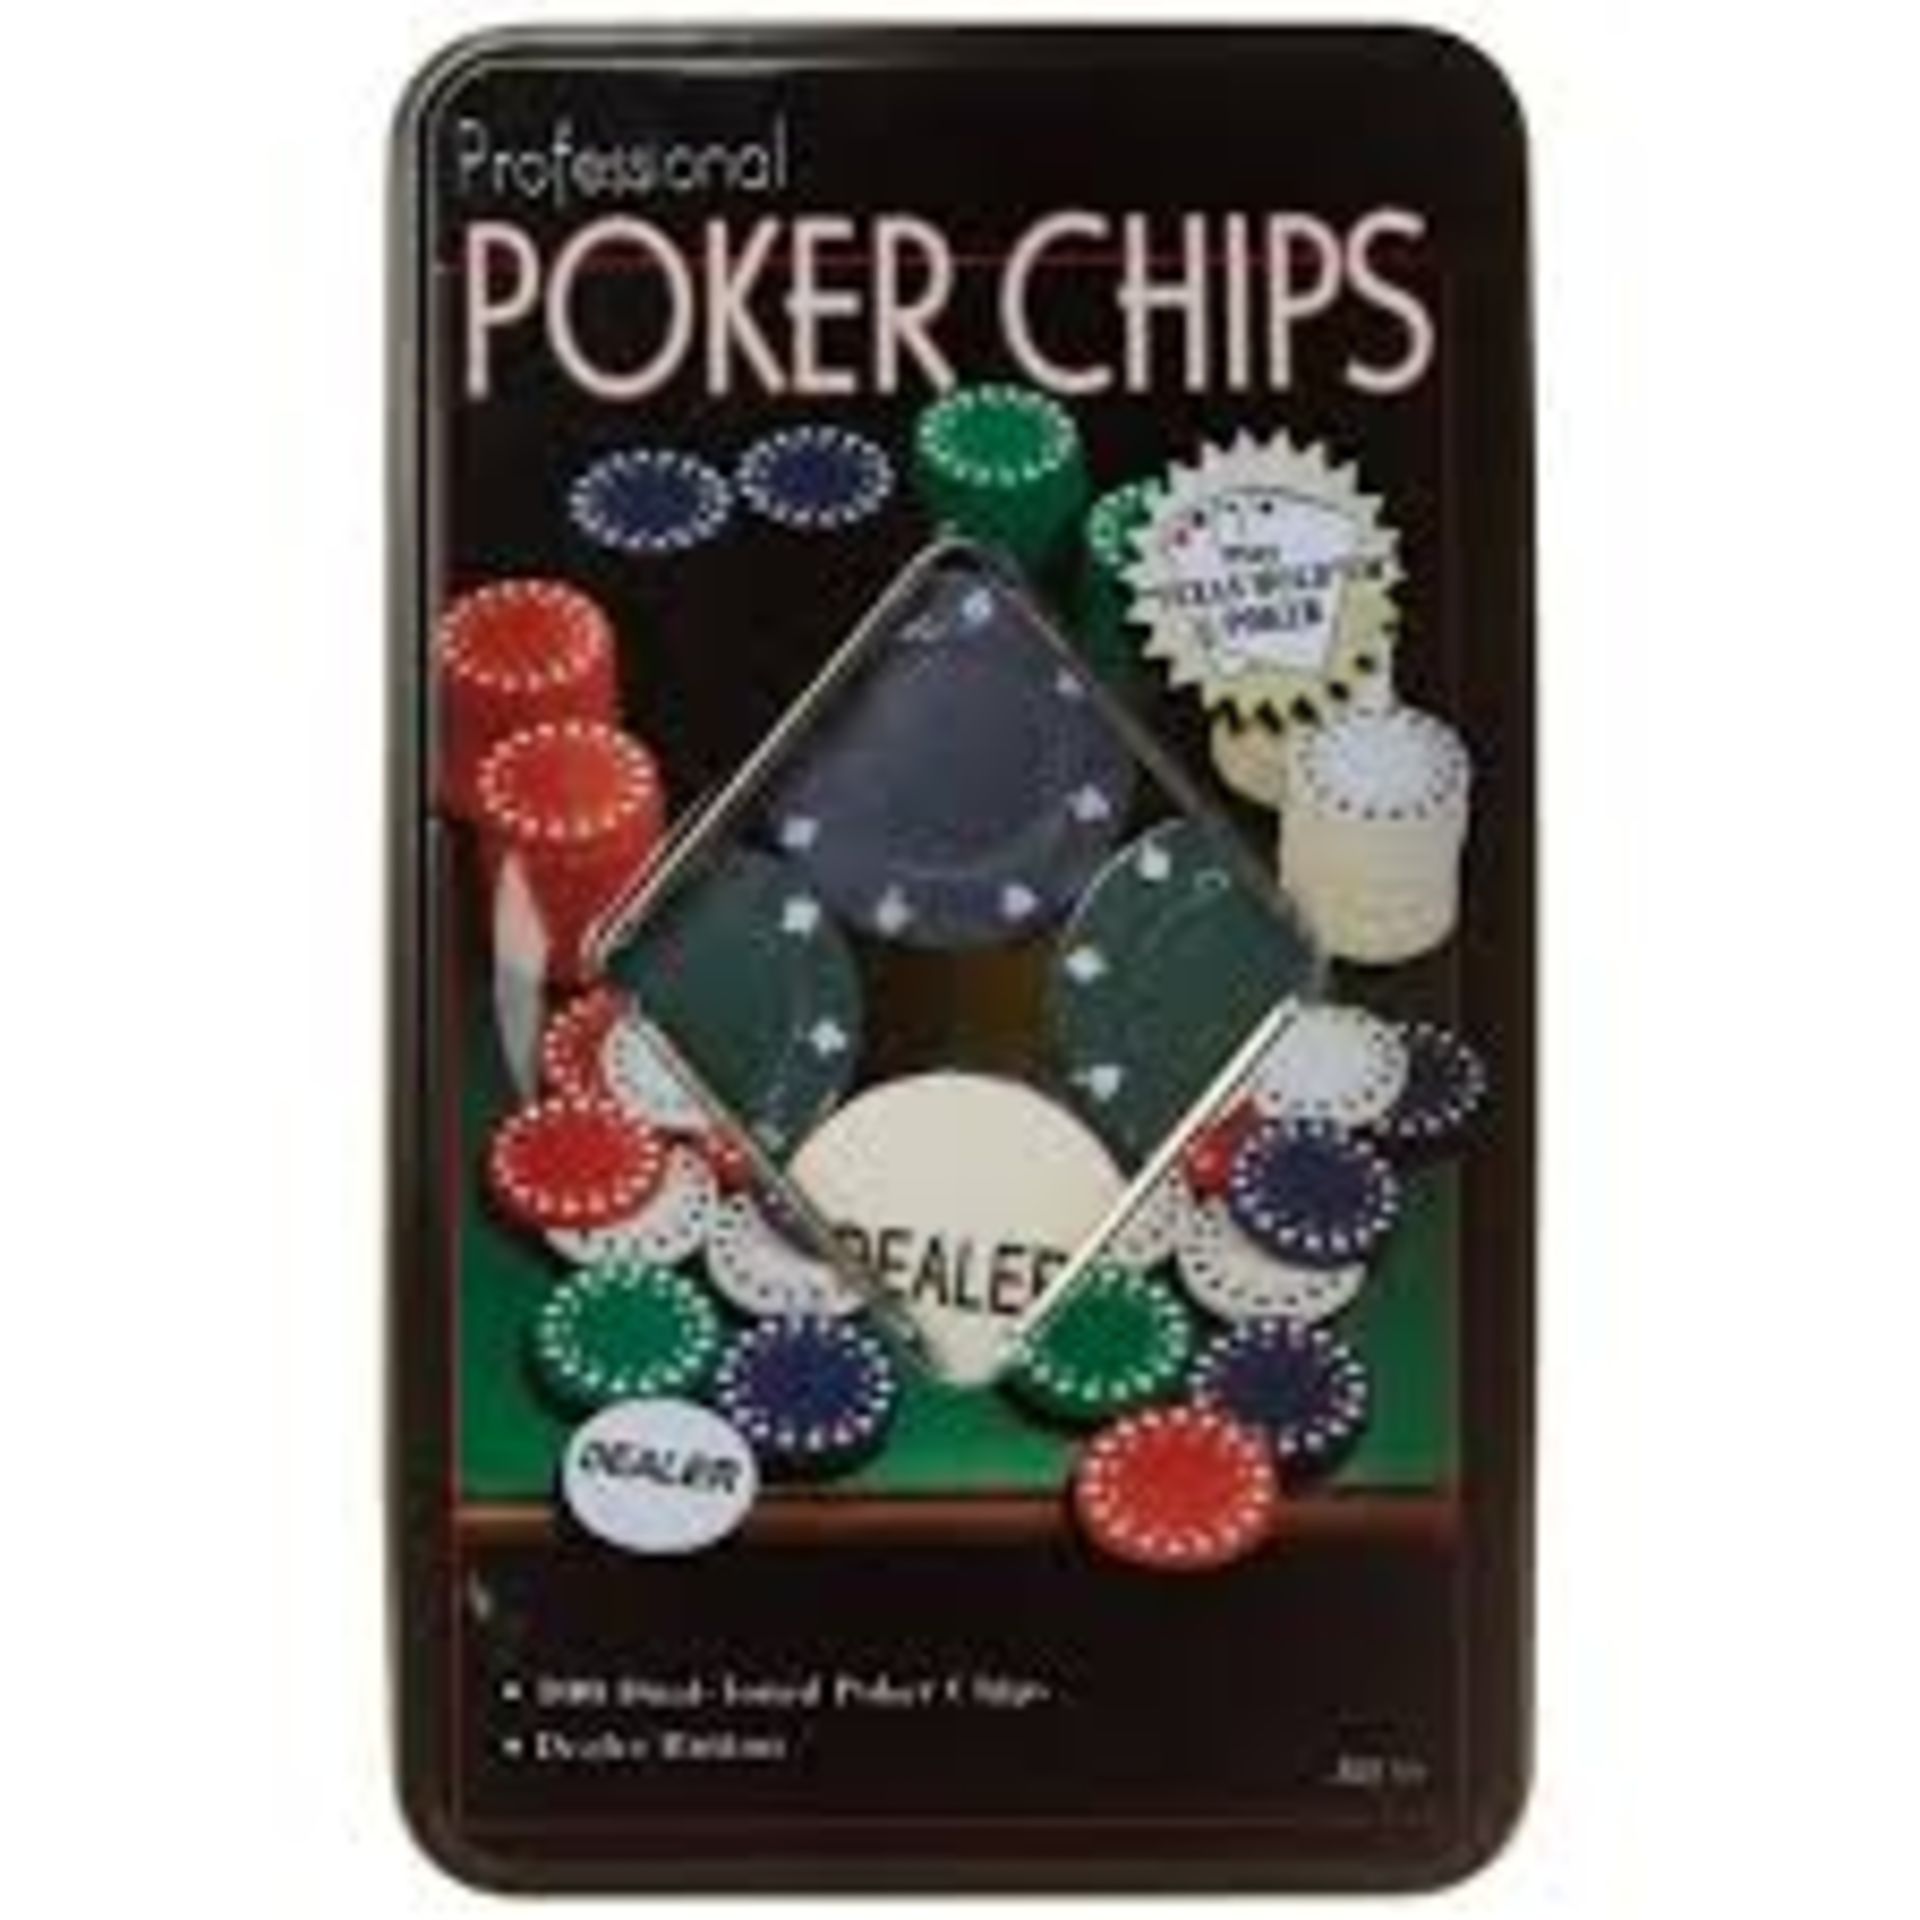 + VAT Brand New Box Of 100 Dual-Toned Professional Poker Chips Includes Dealer Button